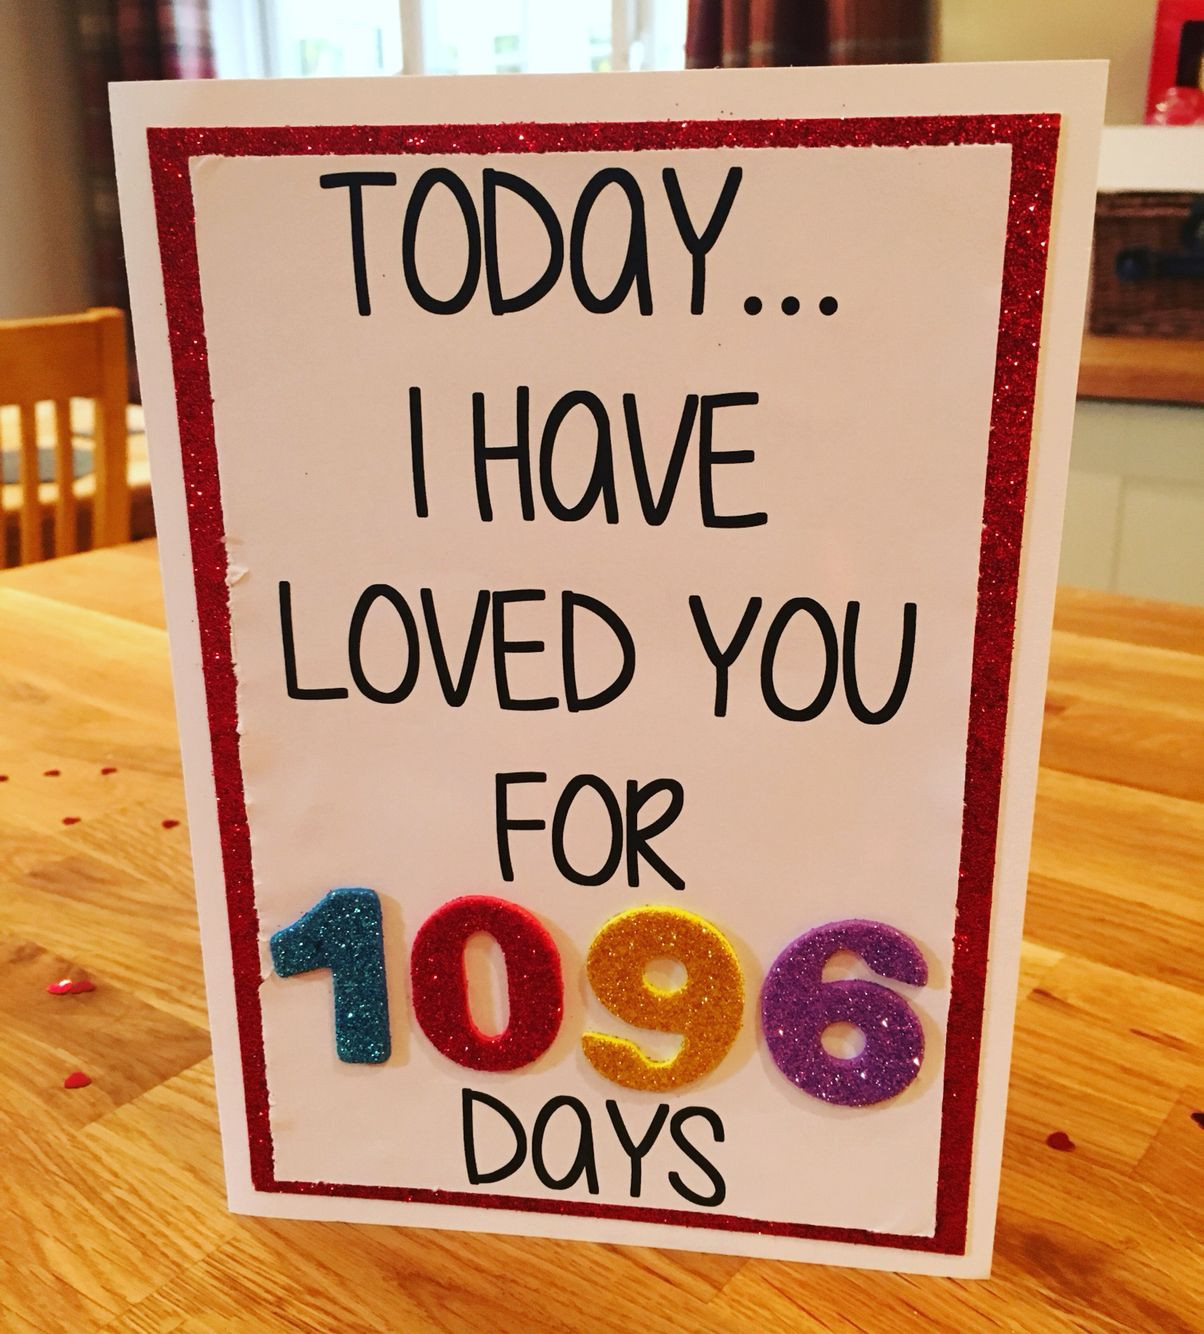 3 Year Anniversary Gift Ideas For Boyfriend
 3 year anniversary card Today I have loved you for 1096